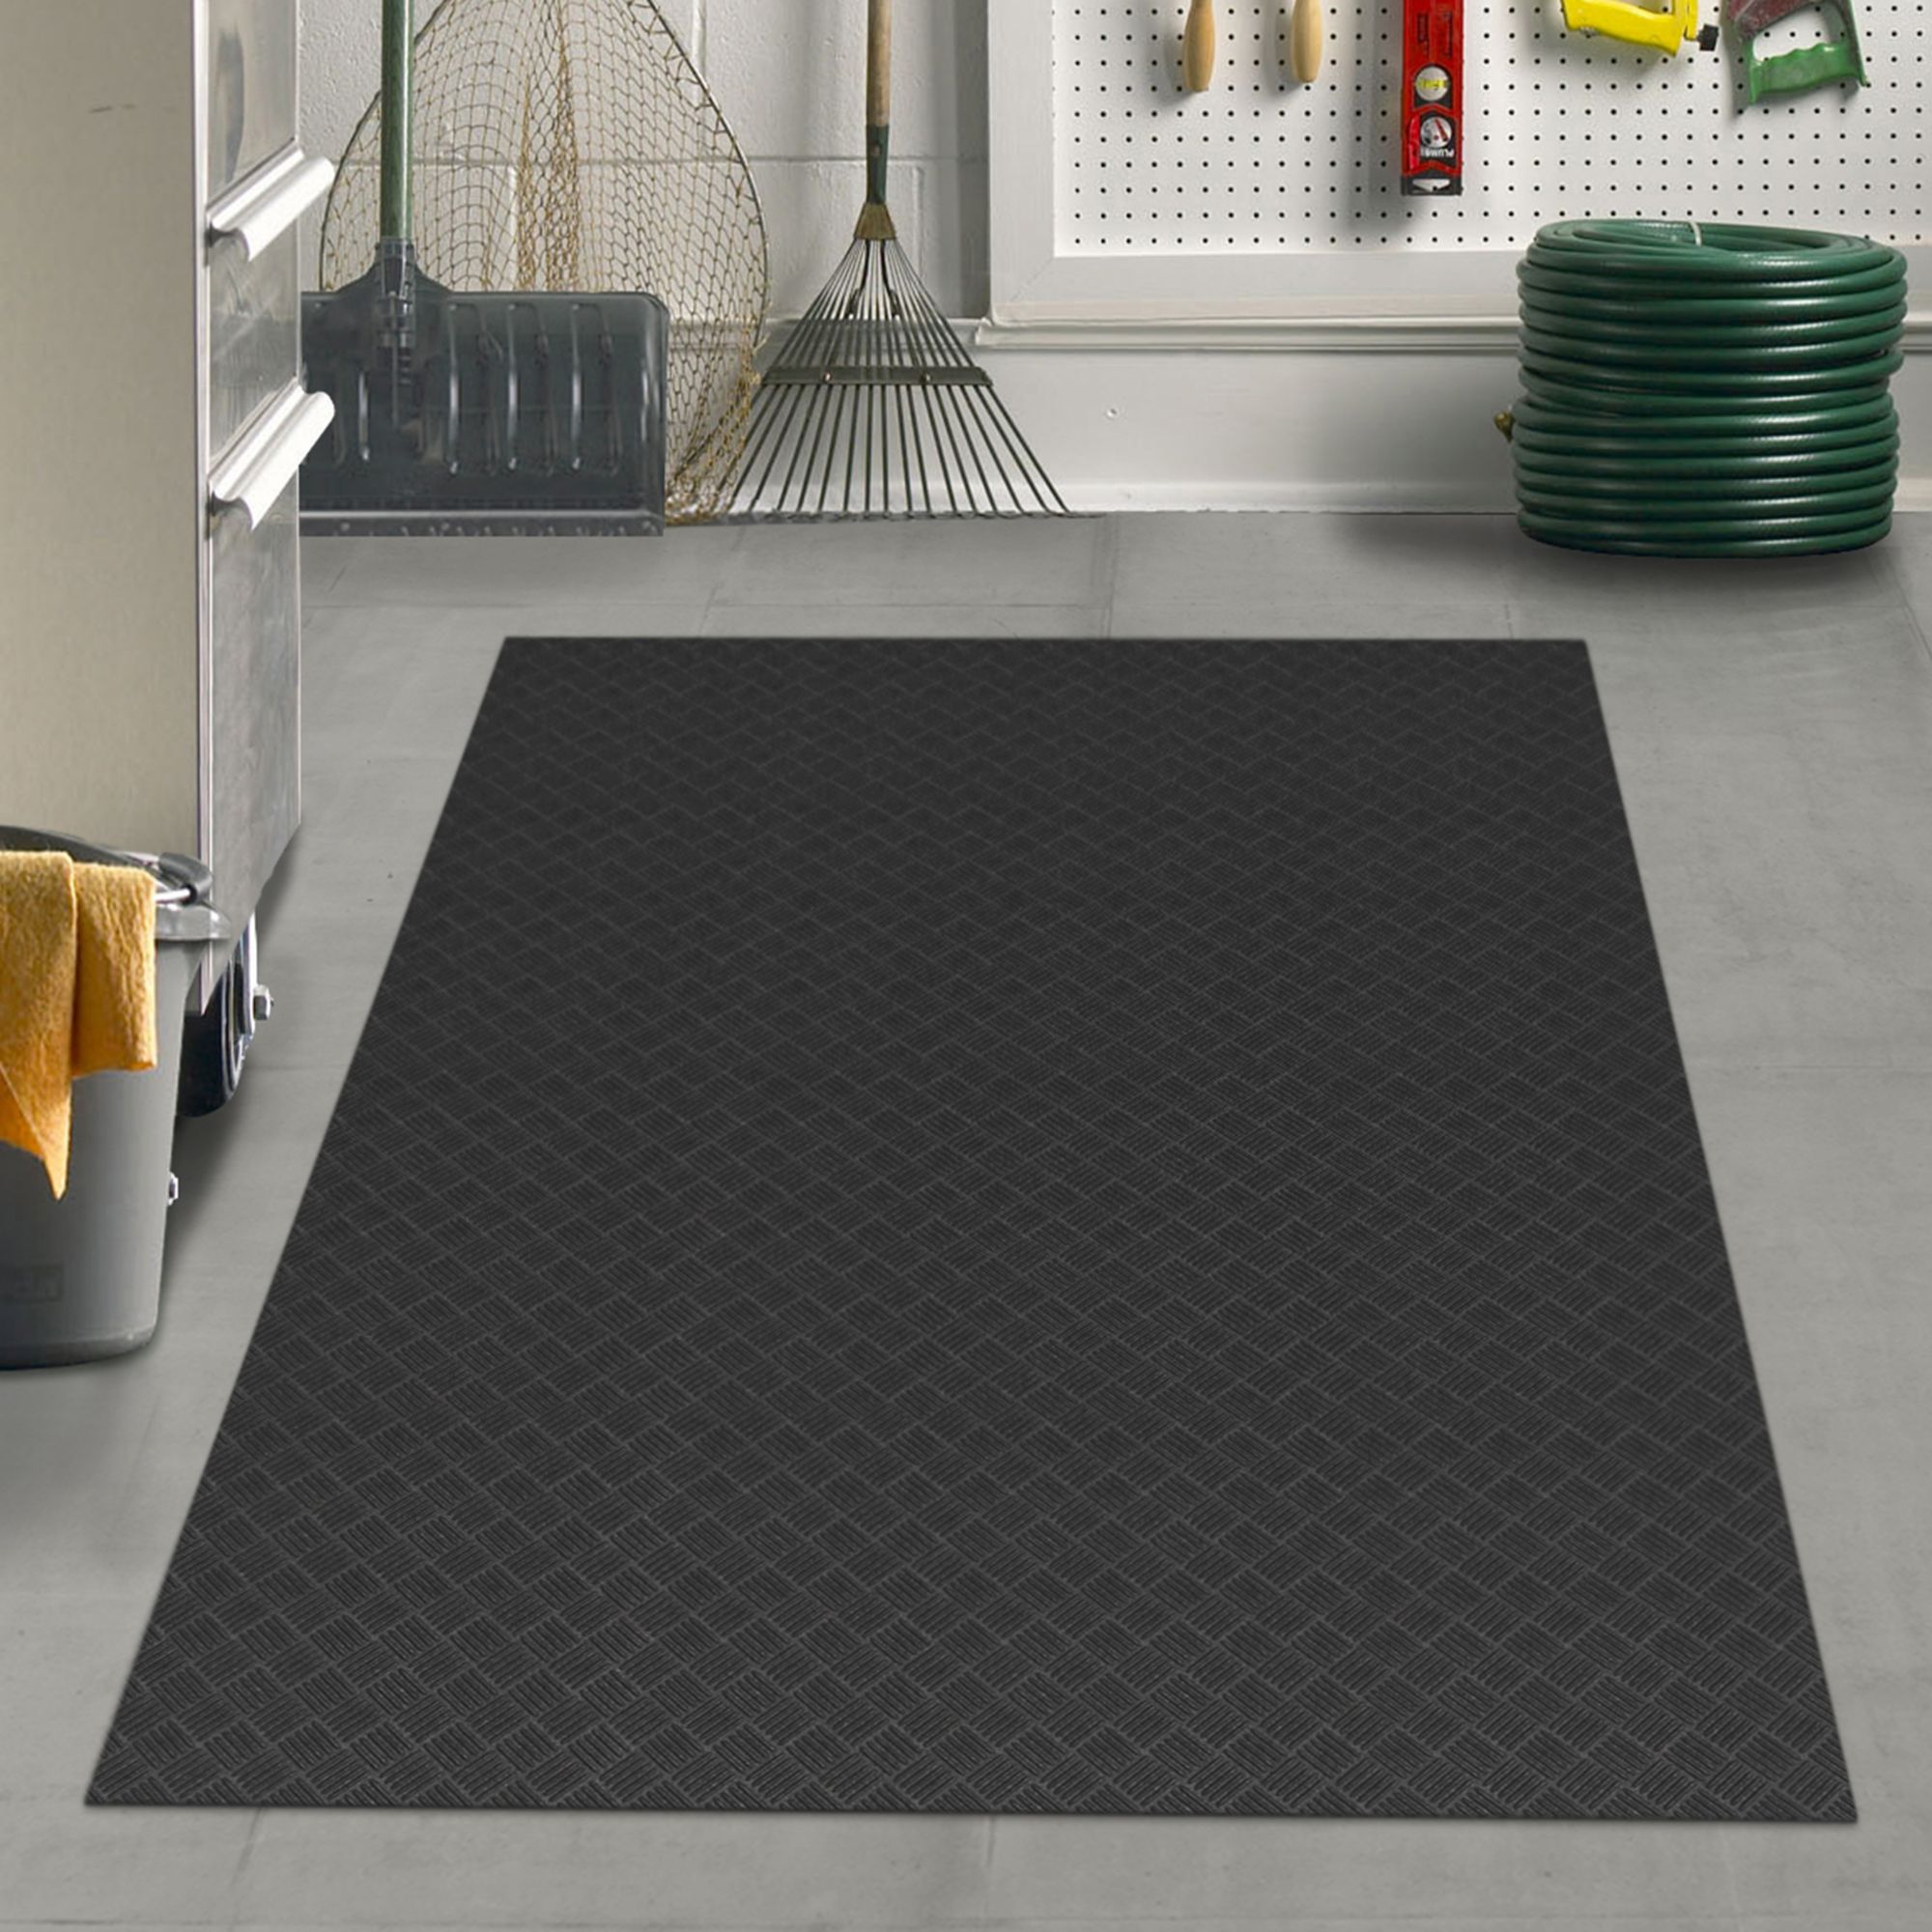 Outdoor Non Slip Decking Mats | The Mayfield Group